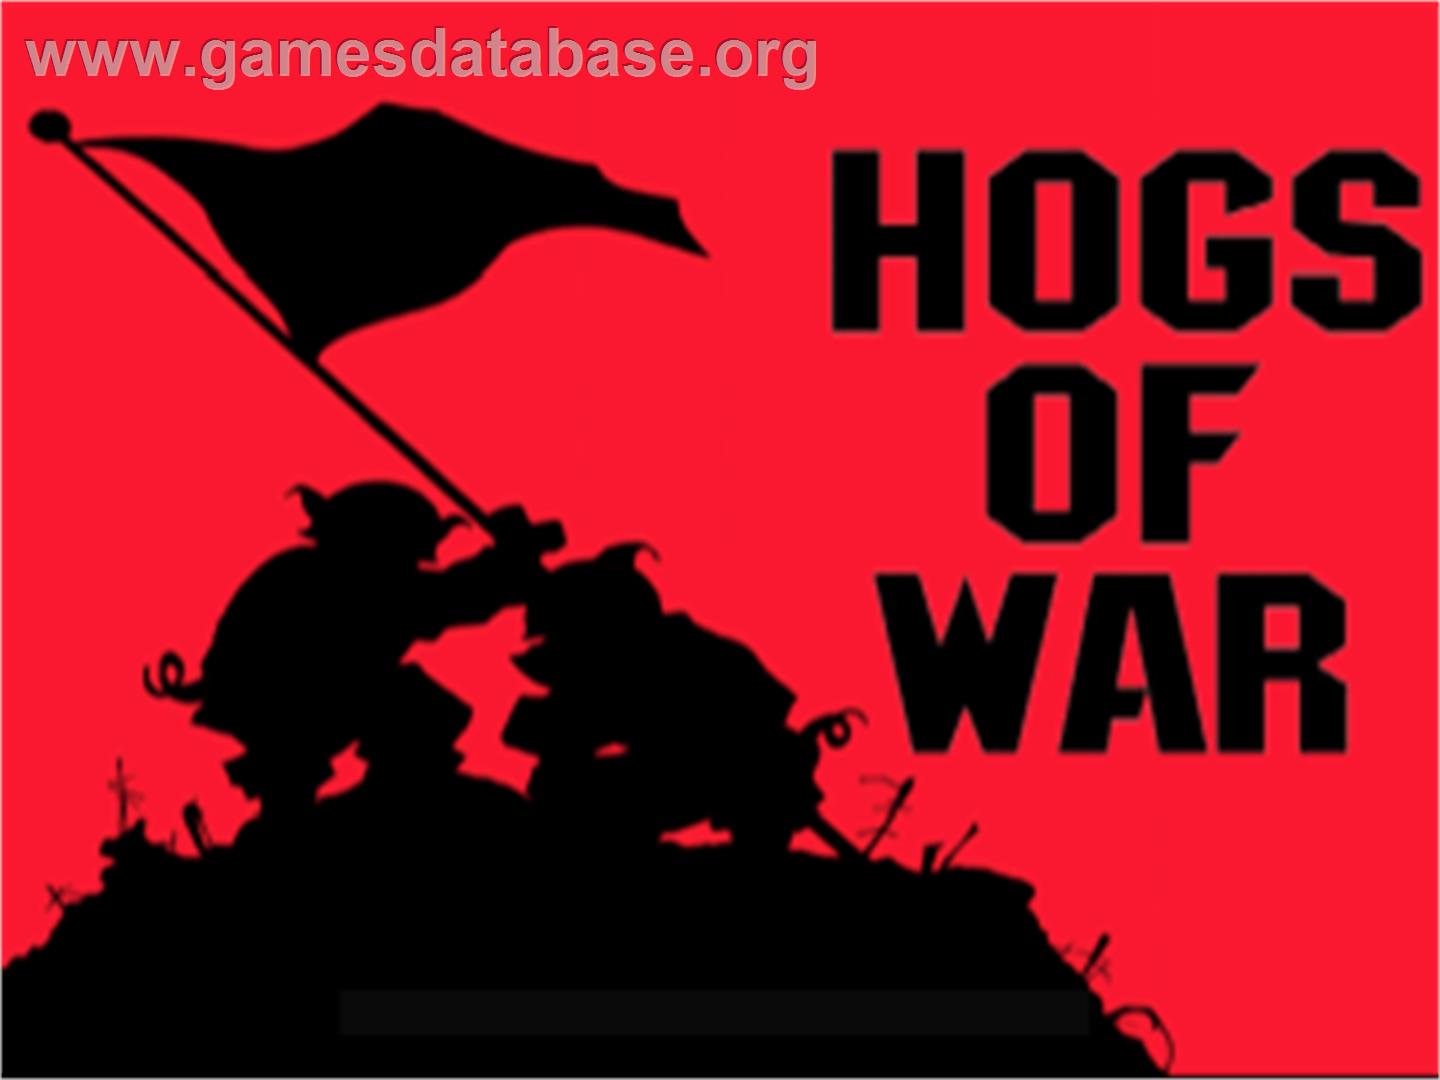 Hogs of War / Worms - Sony Playstation - Artwork - Title Screen